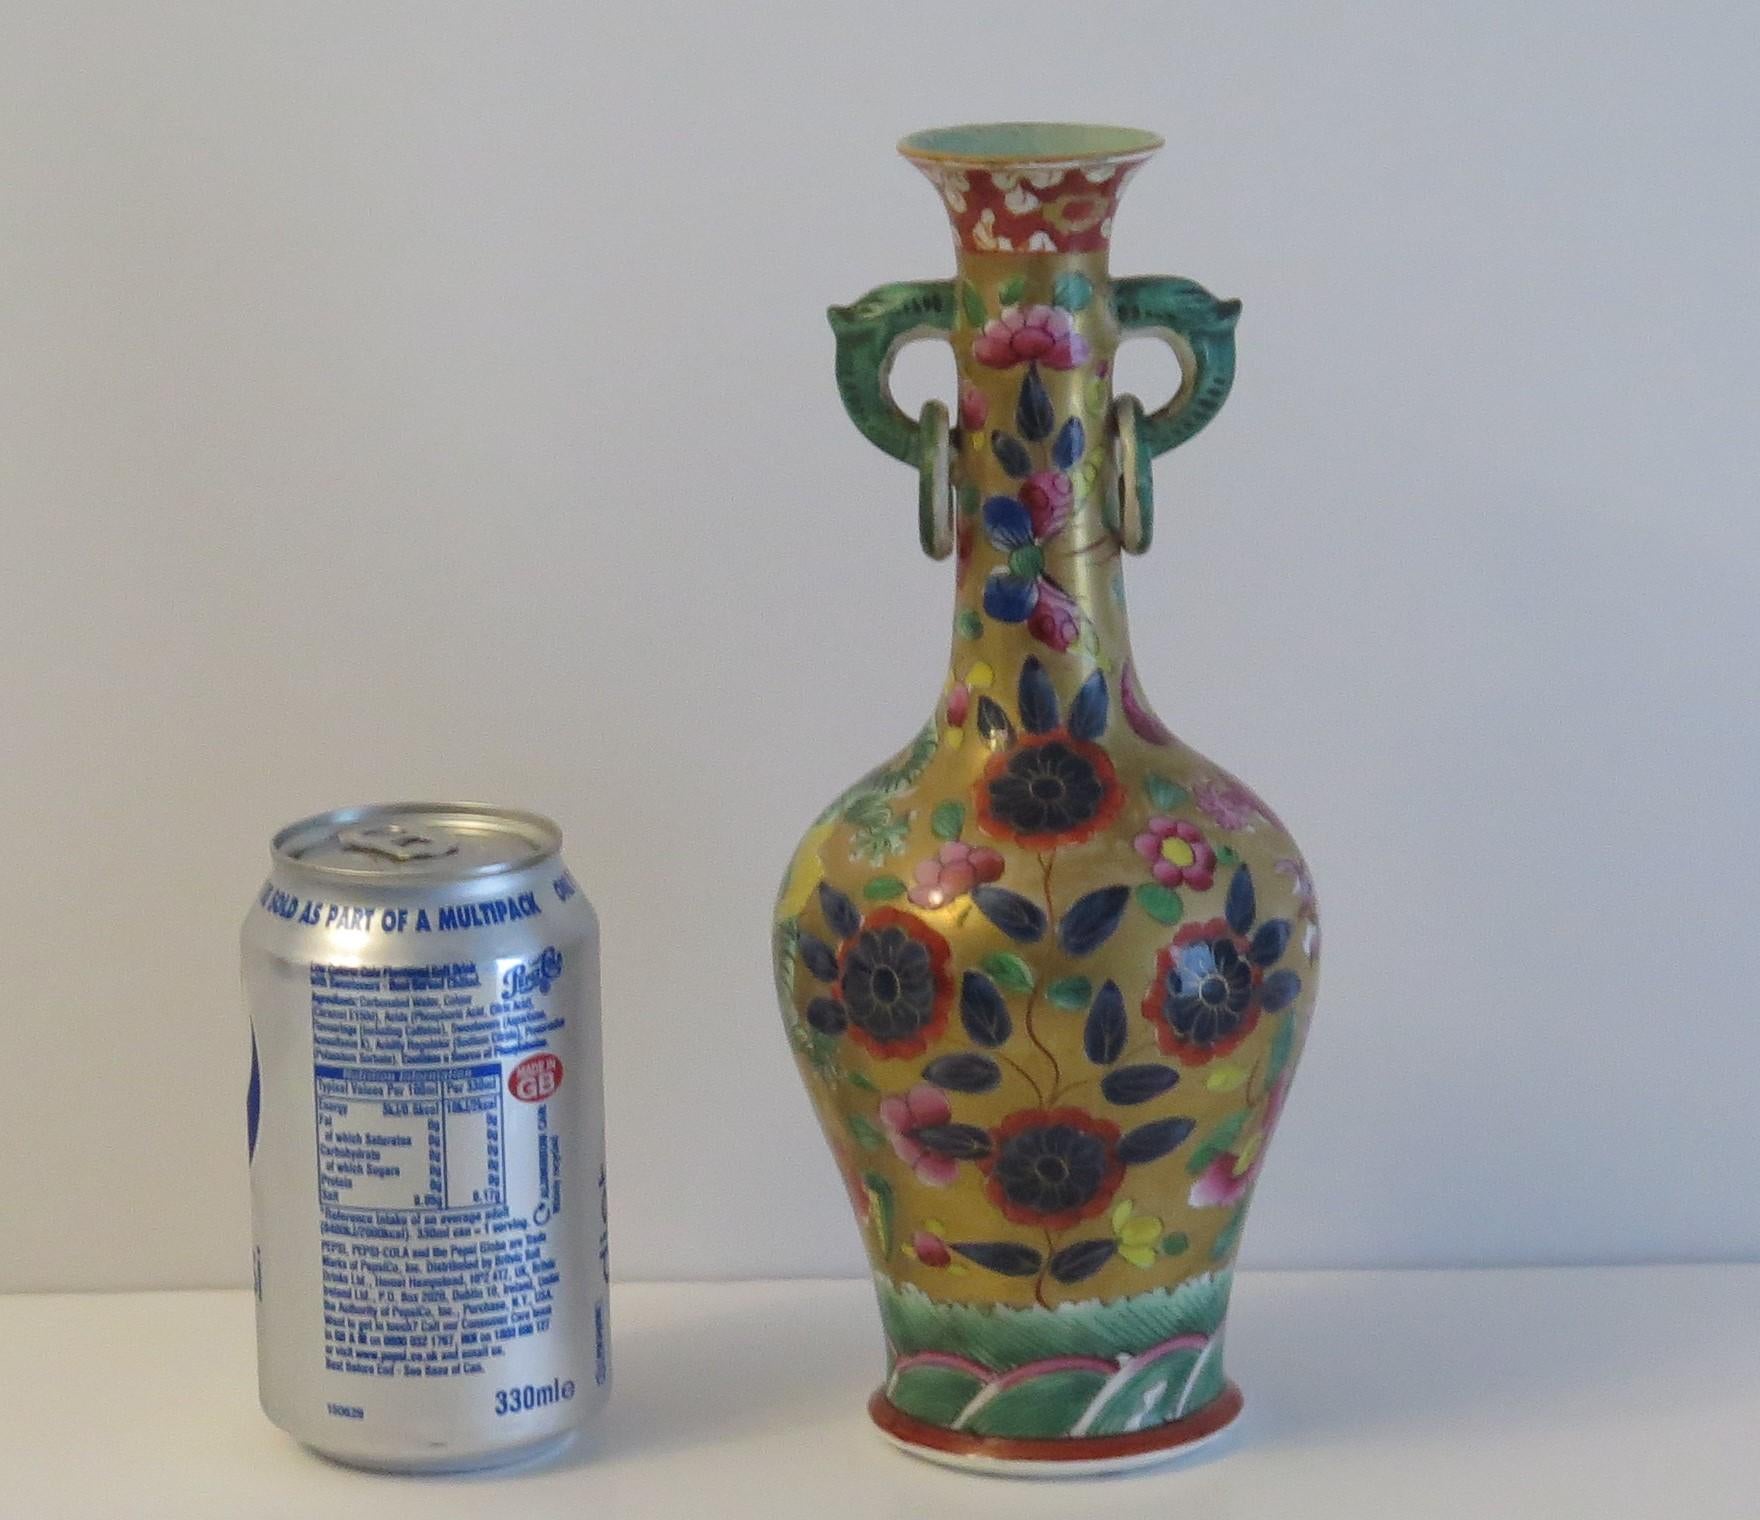 Very Rare Mason's Ironstone Bottle Vase in Chinese Dragon Pattern, circa 1820 For Sale 7